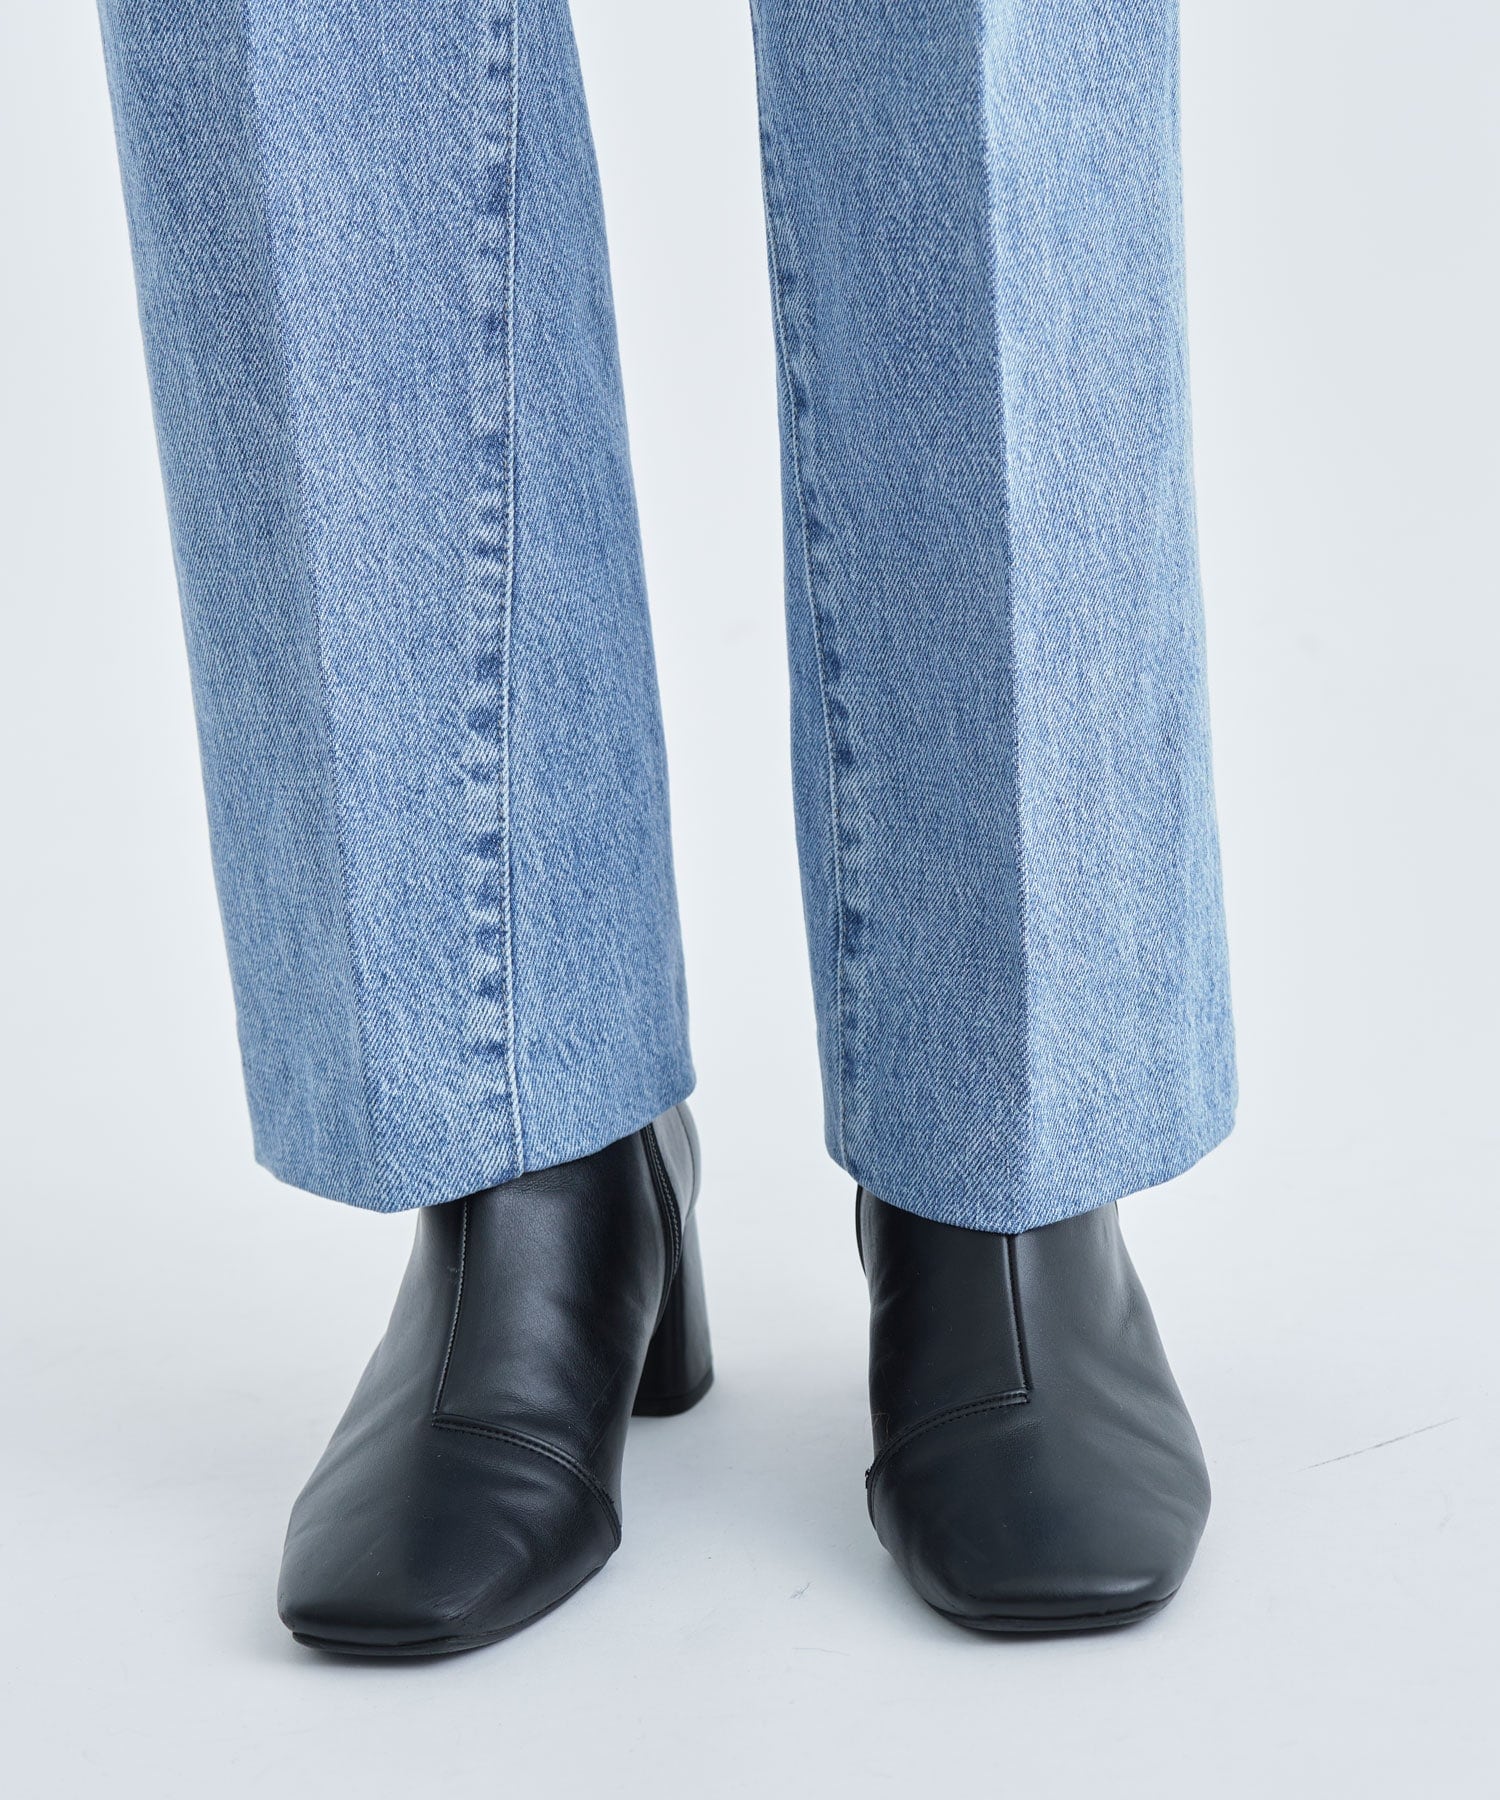 THE BOOTS JEAN TROUSERS TANAKA